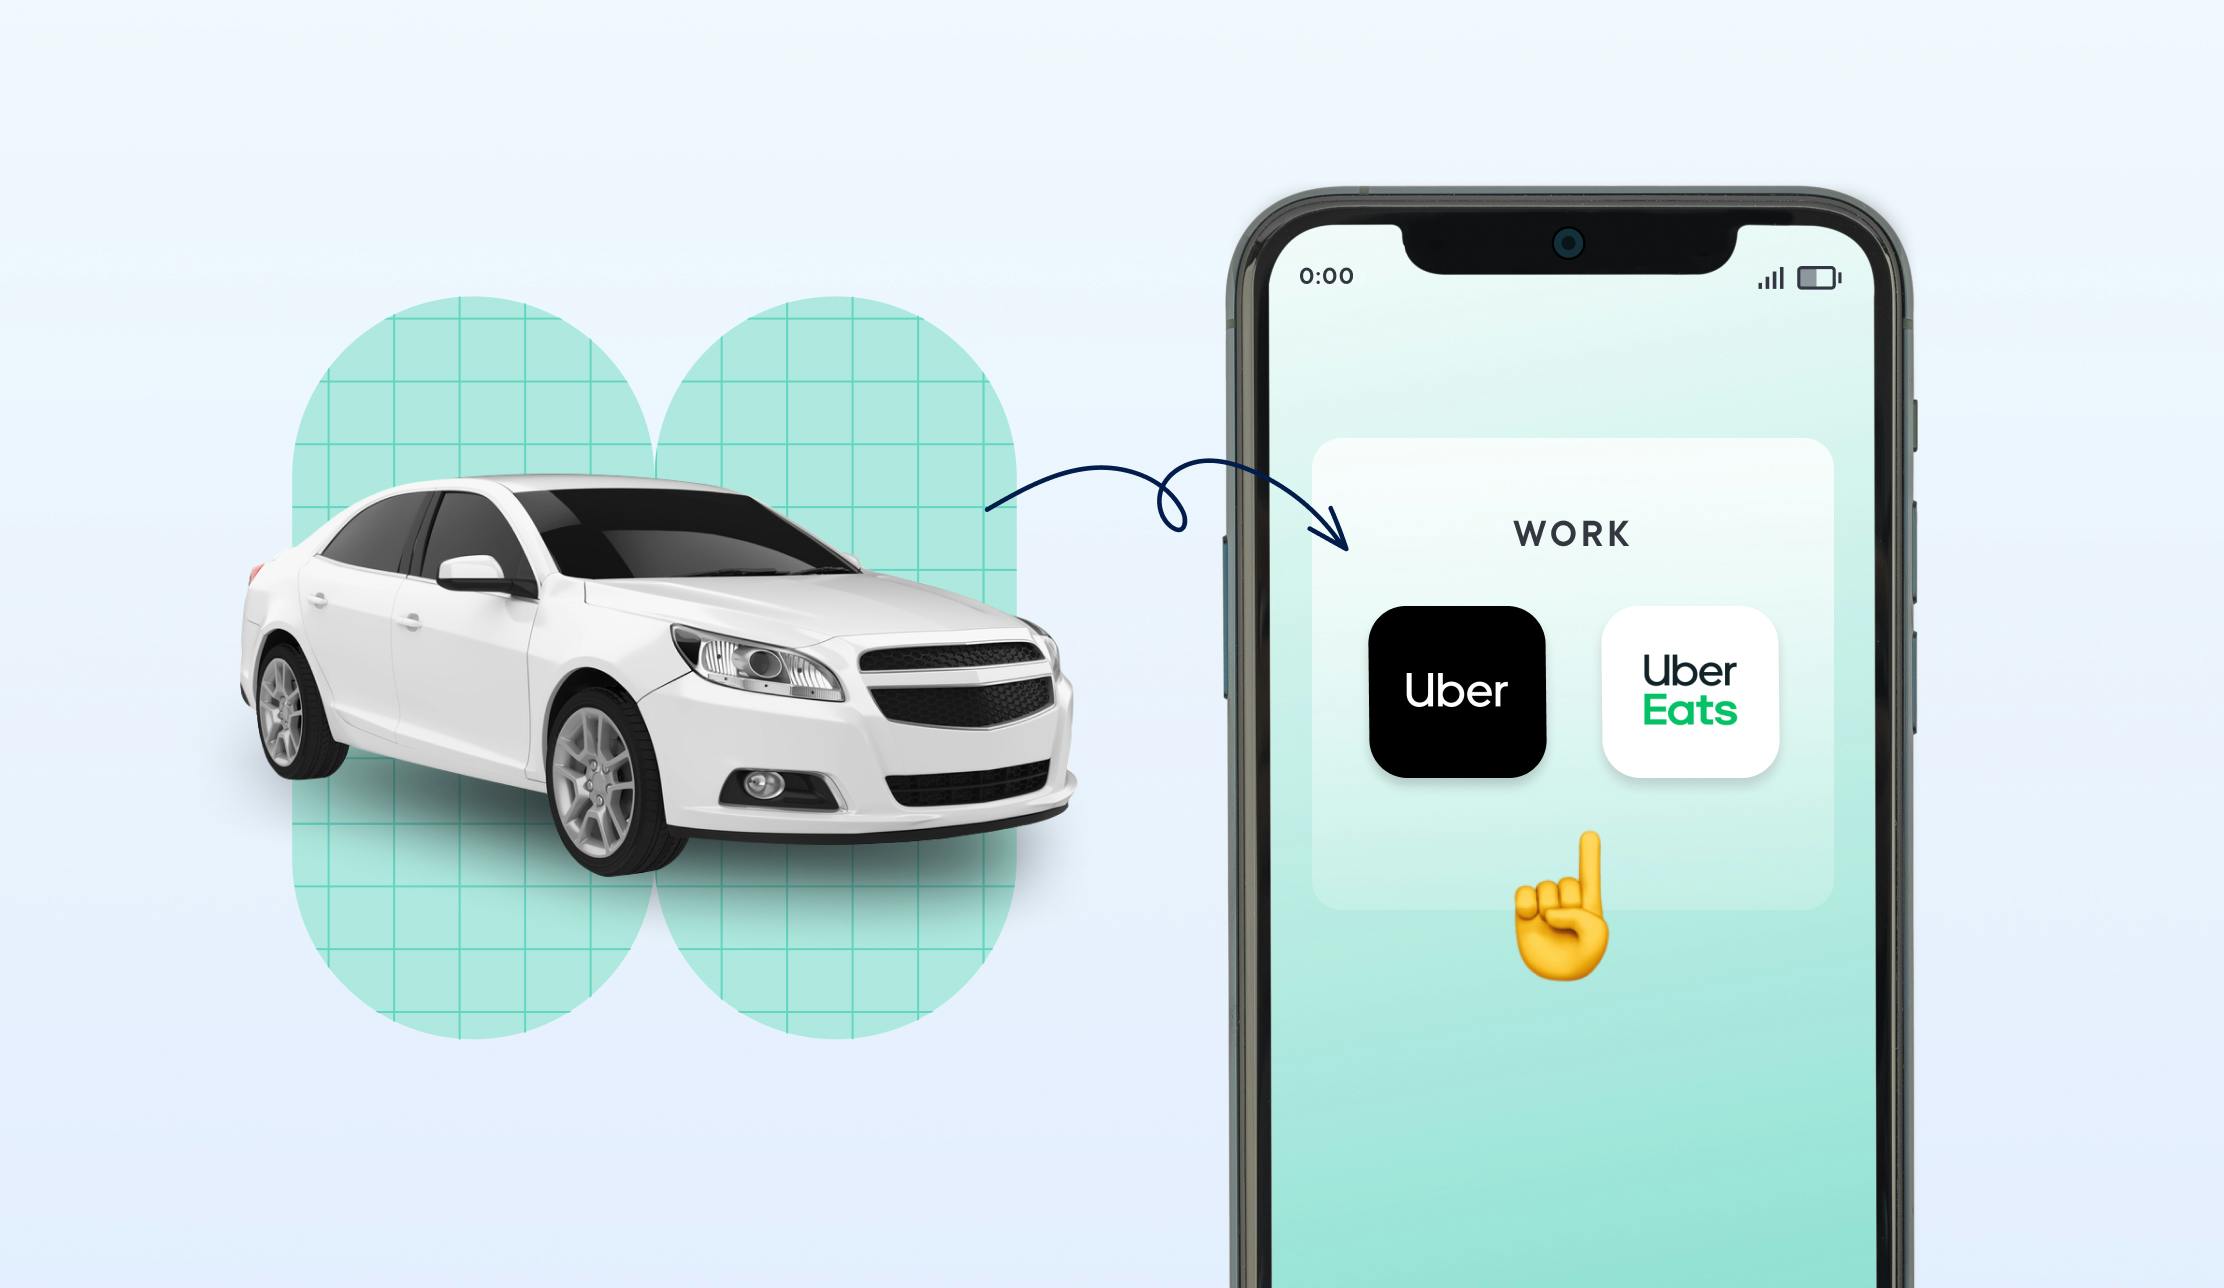 How to Drive for Uber and Uber Eats at the Same Time